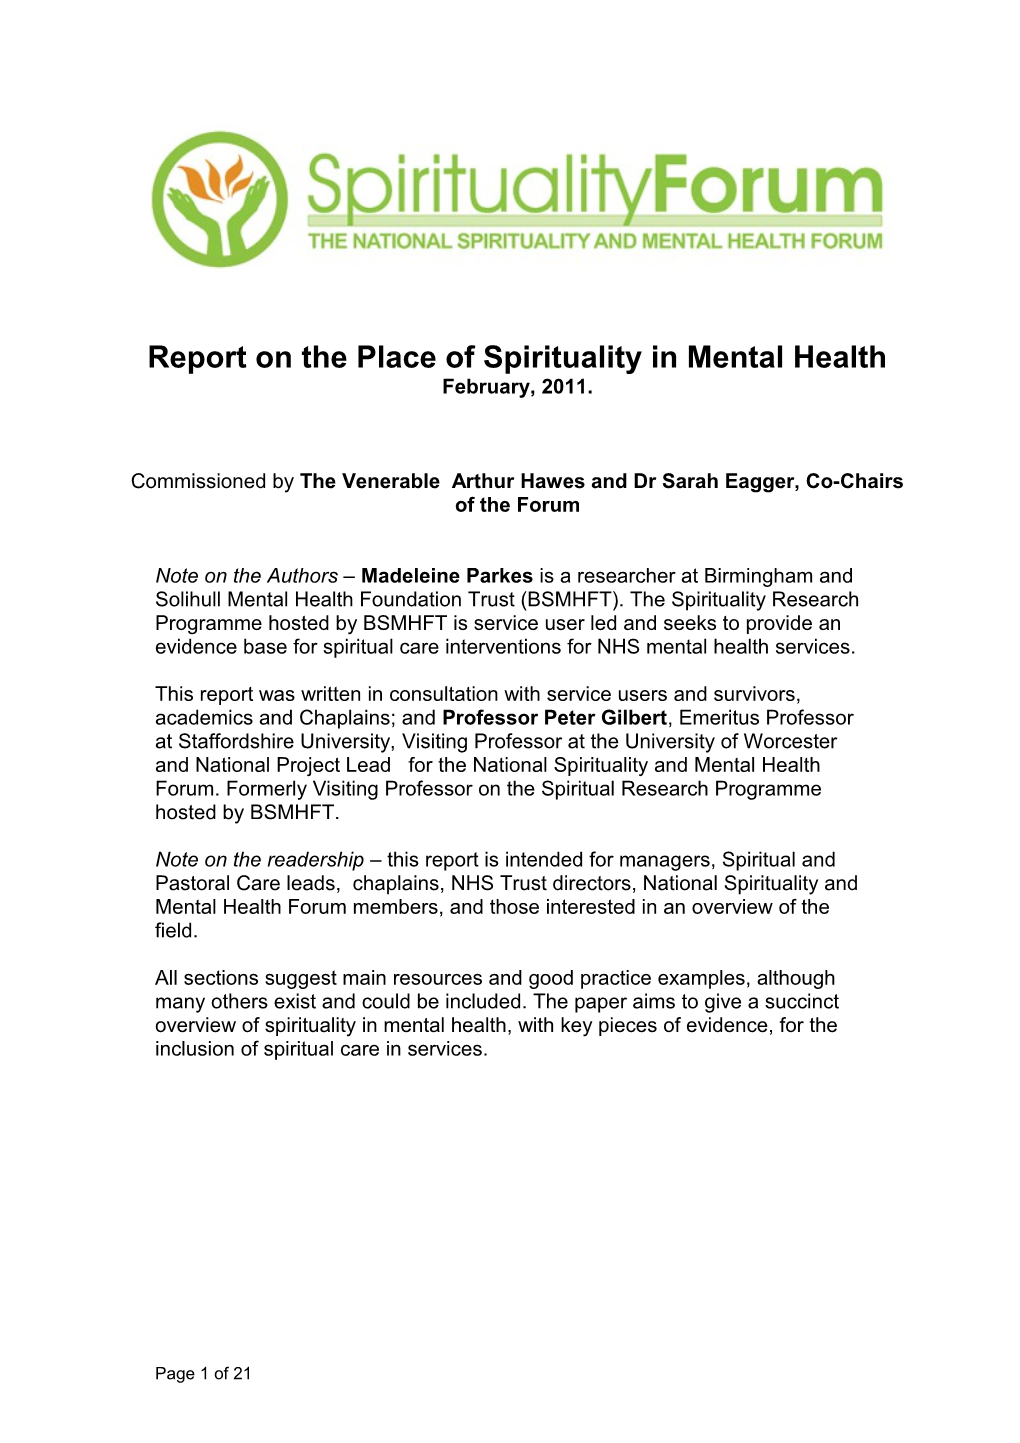 Report on the Place of Spirituality in Mental Health